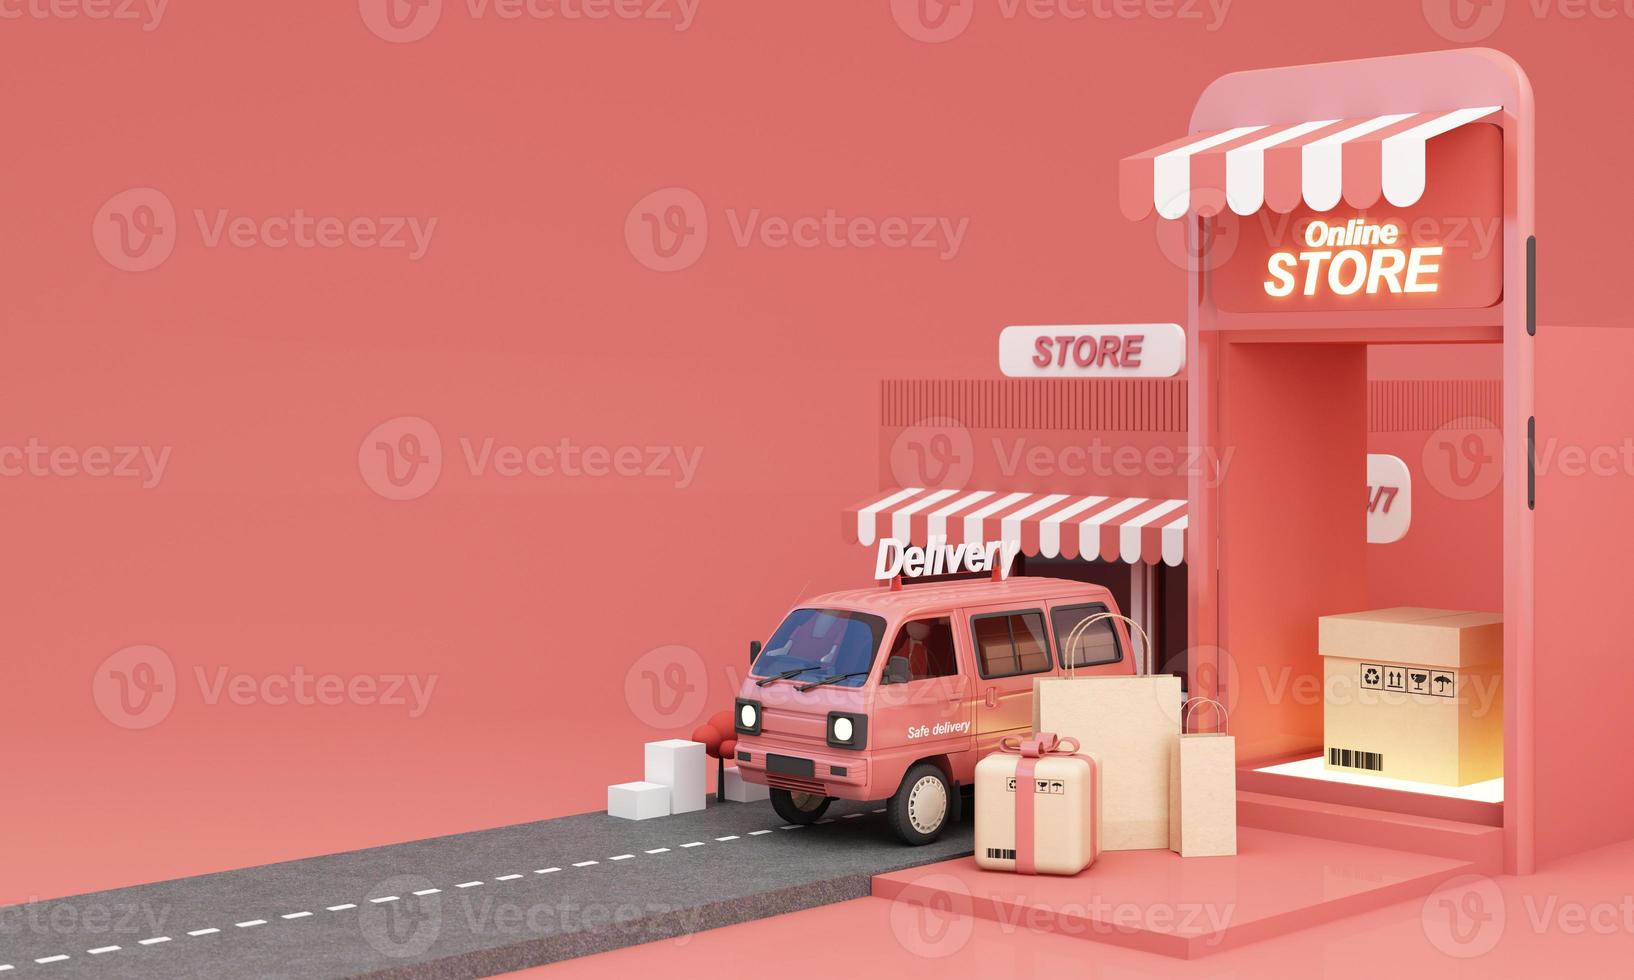 Marketplace online illustration, 3d style internet multi vendor store on laptop computer and phone screen with multi vendor stores Shop sign in orange tones and open 24 hours 3d rendering illustration photo